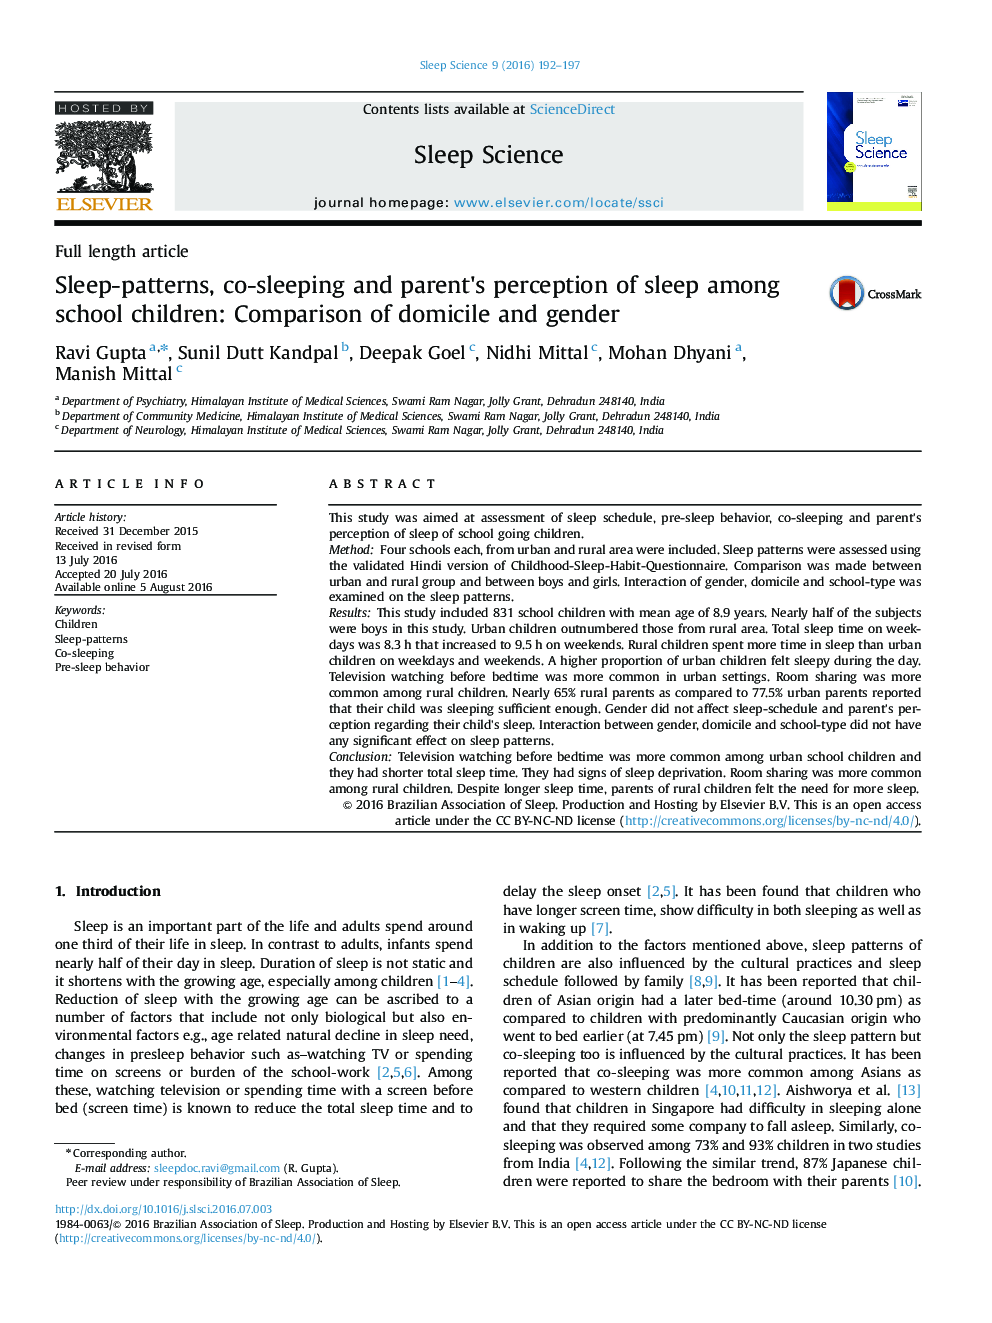 Full length articleSleep-patterns, co-sleeping and parent's perception of sleep among school children: Comparison of domicile and gender